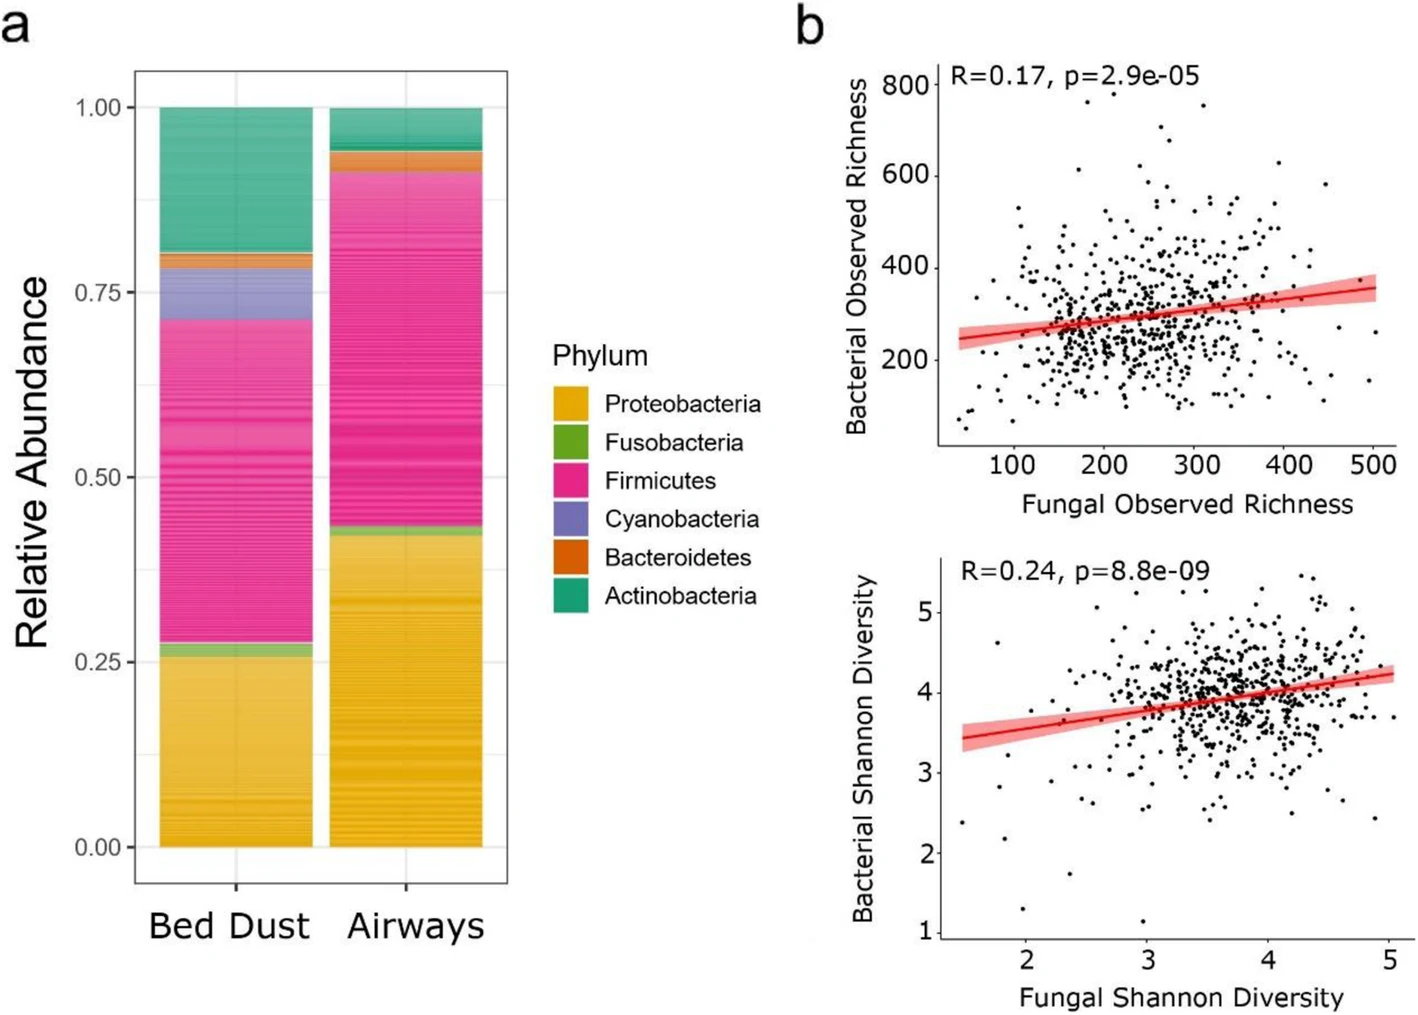 a Relative abundance of bacterial phyla in bed dust and airway samples. Phyla with a mean abundance of at least 1% abundance across bed dust samples are represented in colors. b Associations between fungal and bacterial alpha diversity (observed richness and Shannon diversity index values) for a given sample. The shaded gray region represents 95% confidence intervals. Linear regression analysis: p = 2.9e−05, R = 0.17 for observed richness and p = 8.8e−09, R = 0.25 for Shannon diversity